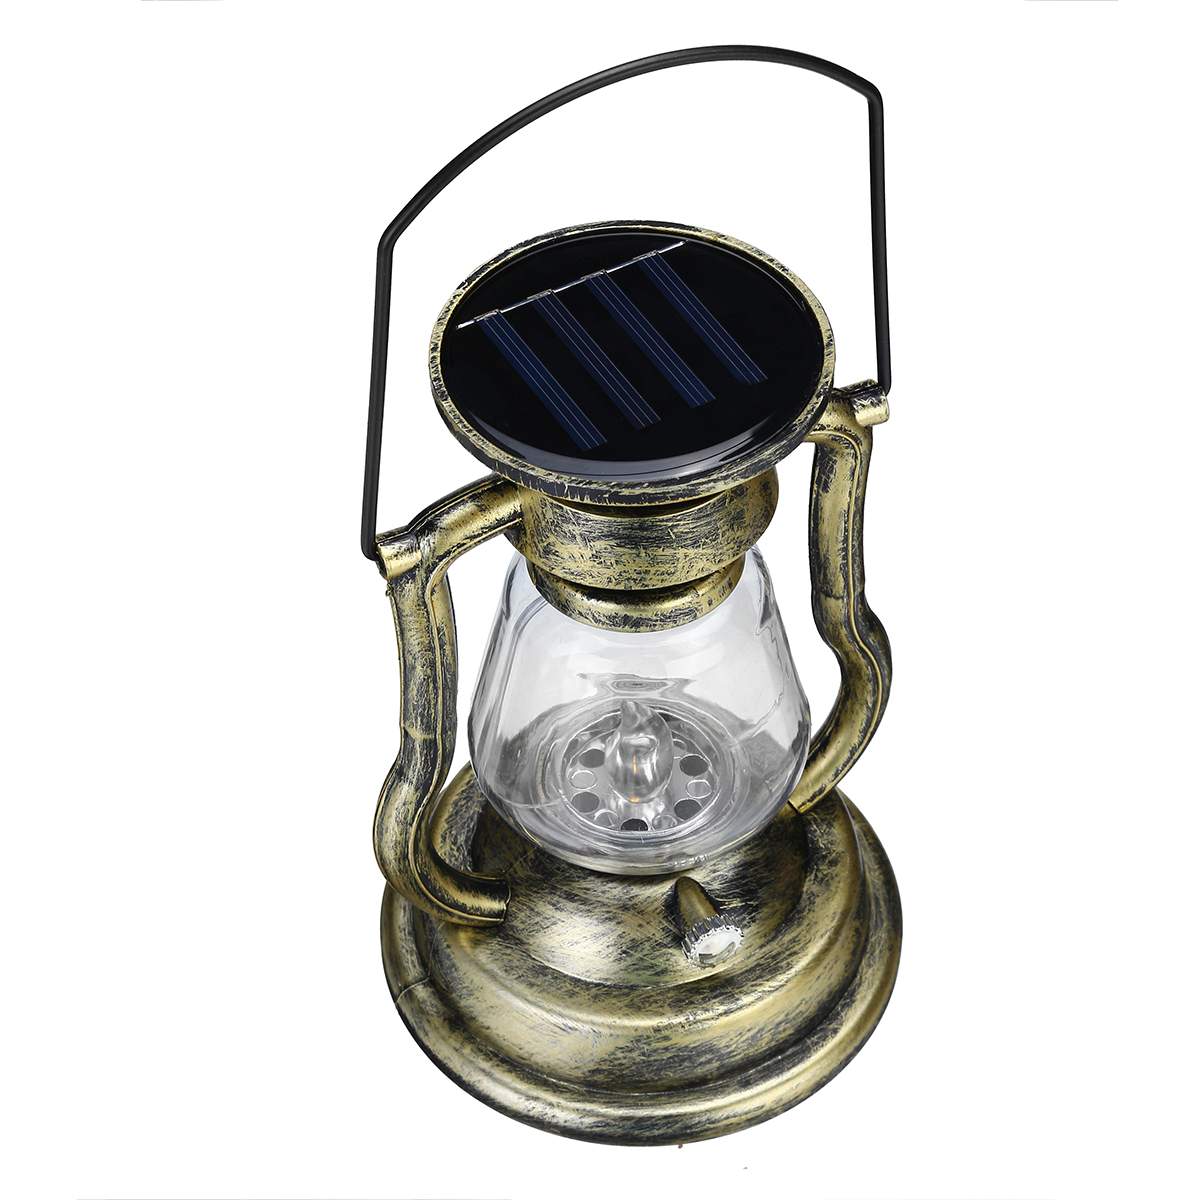 Outdoor Garden lamp Solar Powered LED Light Hanging Lantern Flameless Candle Lamp Portable Nightlight Vintage Style Home Decor